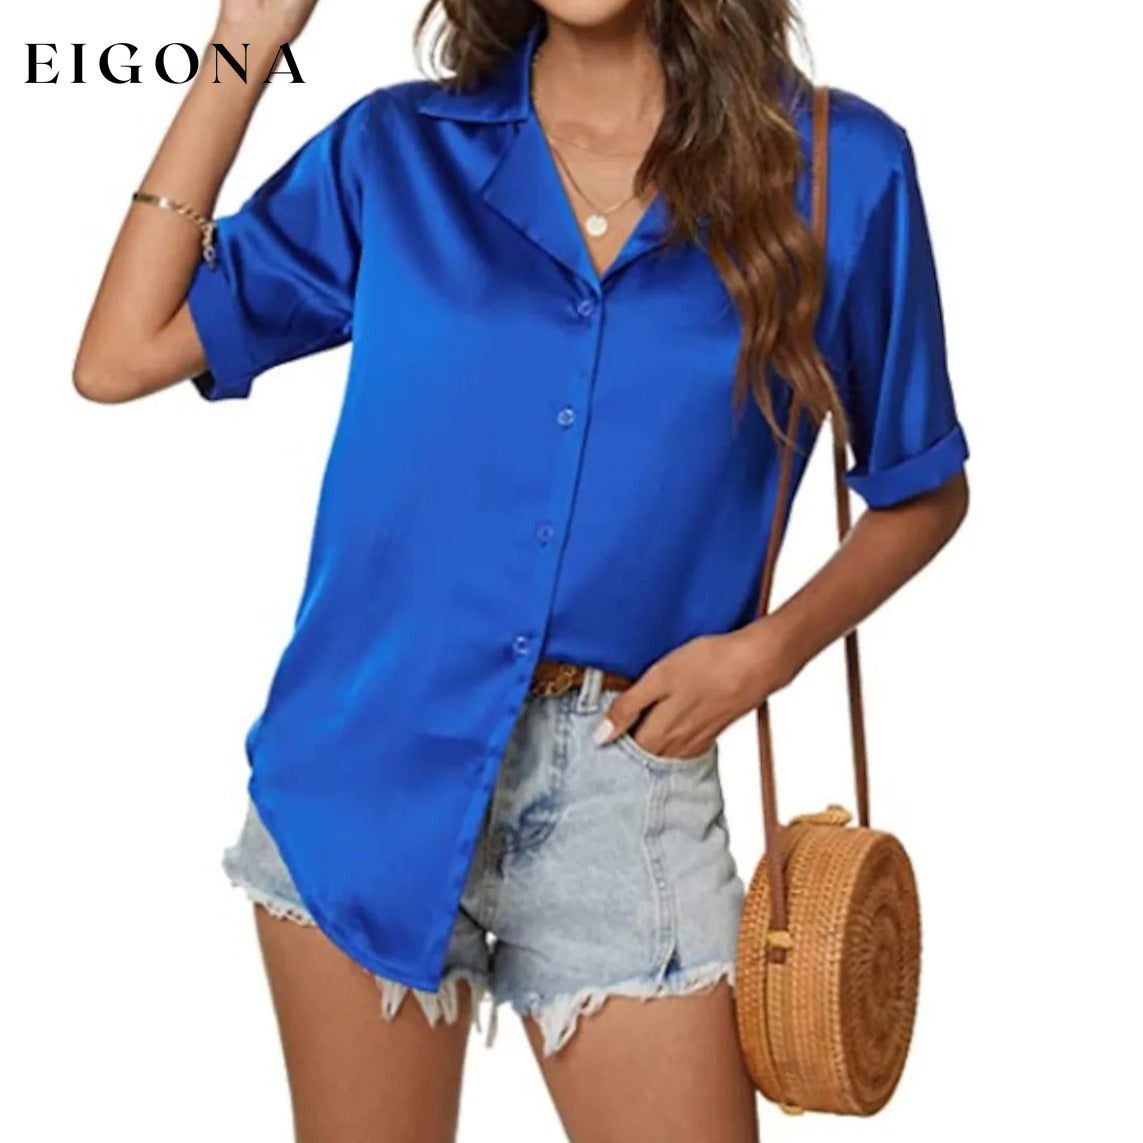 Women's Short Sleeve Casual Satin Button Down Shirt Blue __stock:200 clothes Low stock refund_fee:800 tops